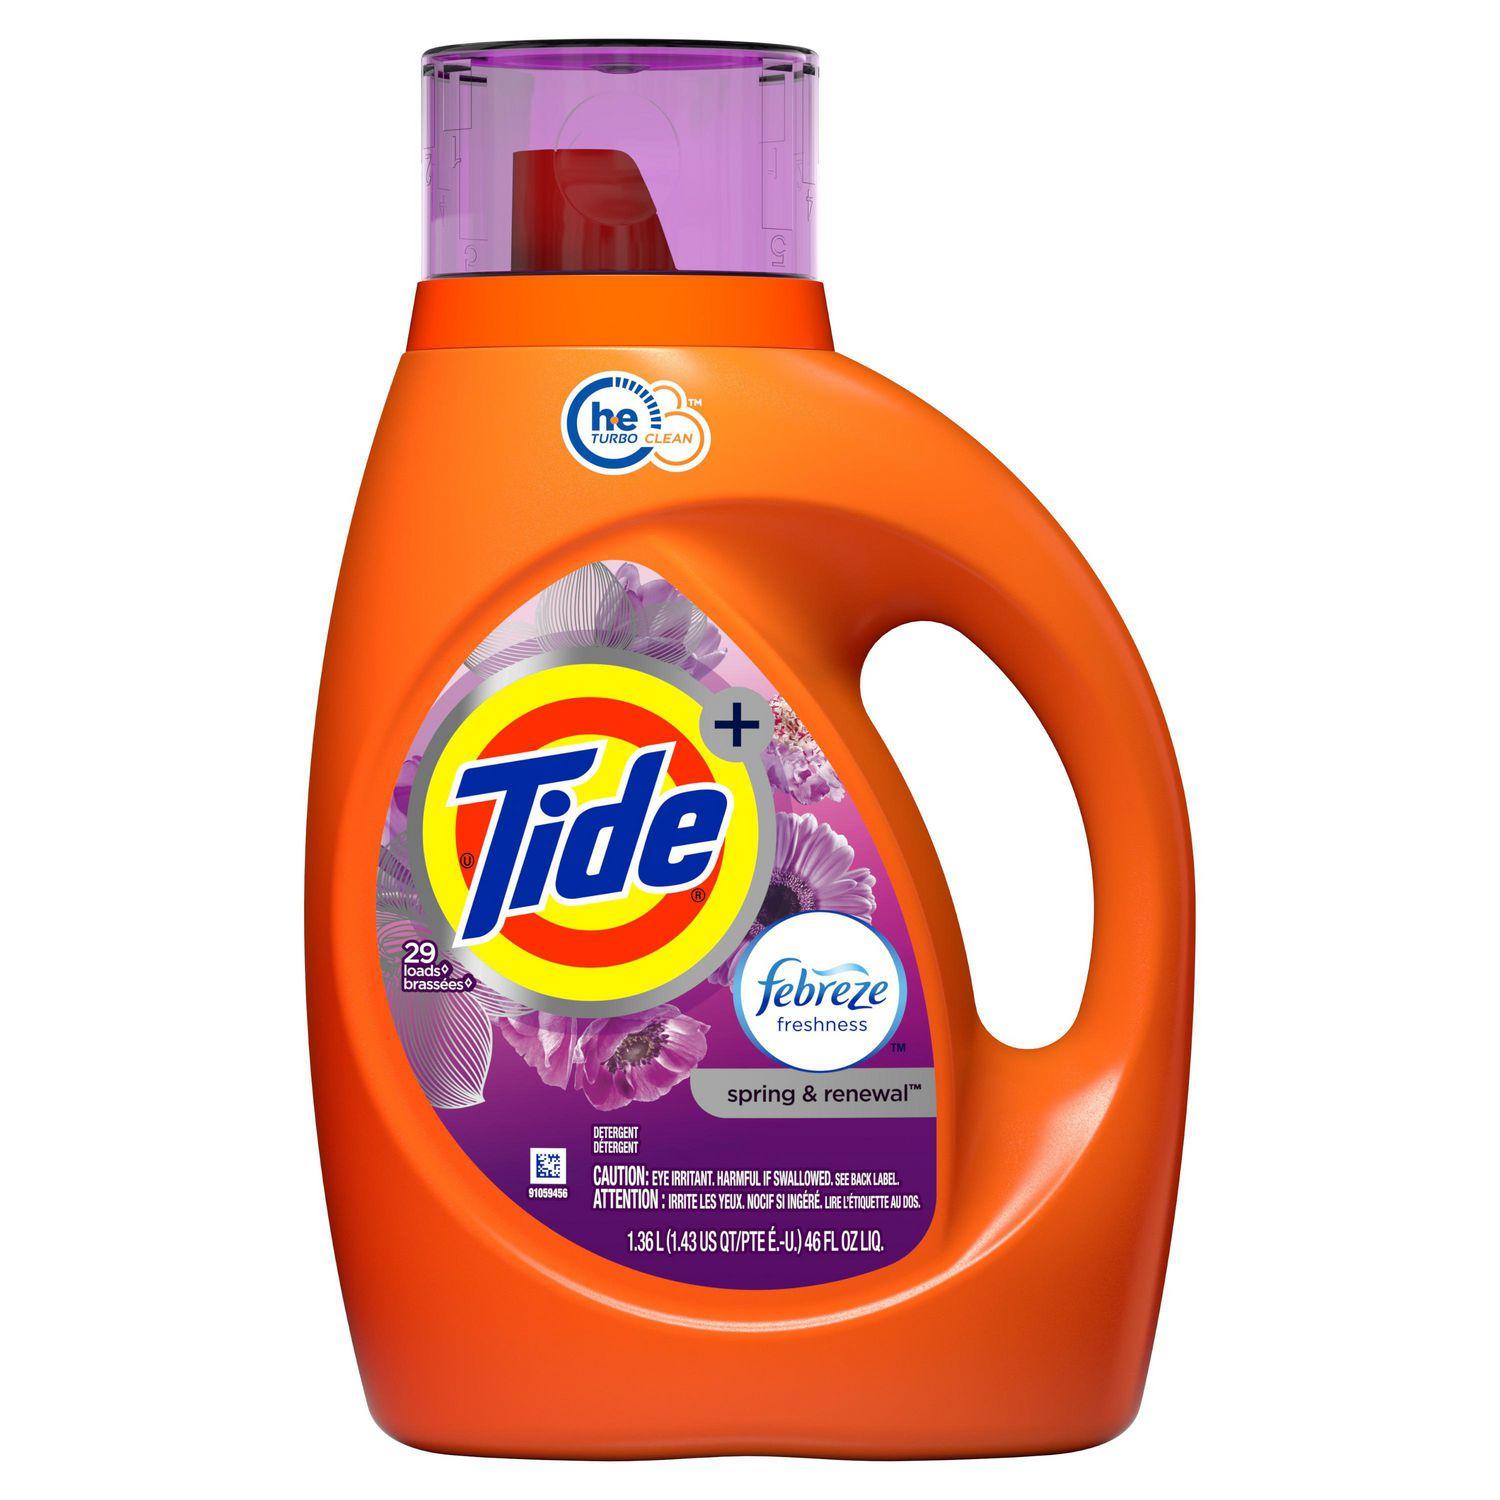 tide-plus-febreze-freshness-he-turbo-clean-liquid-laundry-detergent-spring-and-renewal-scent